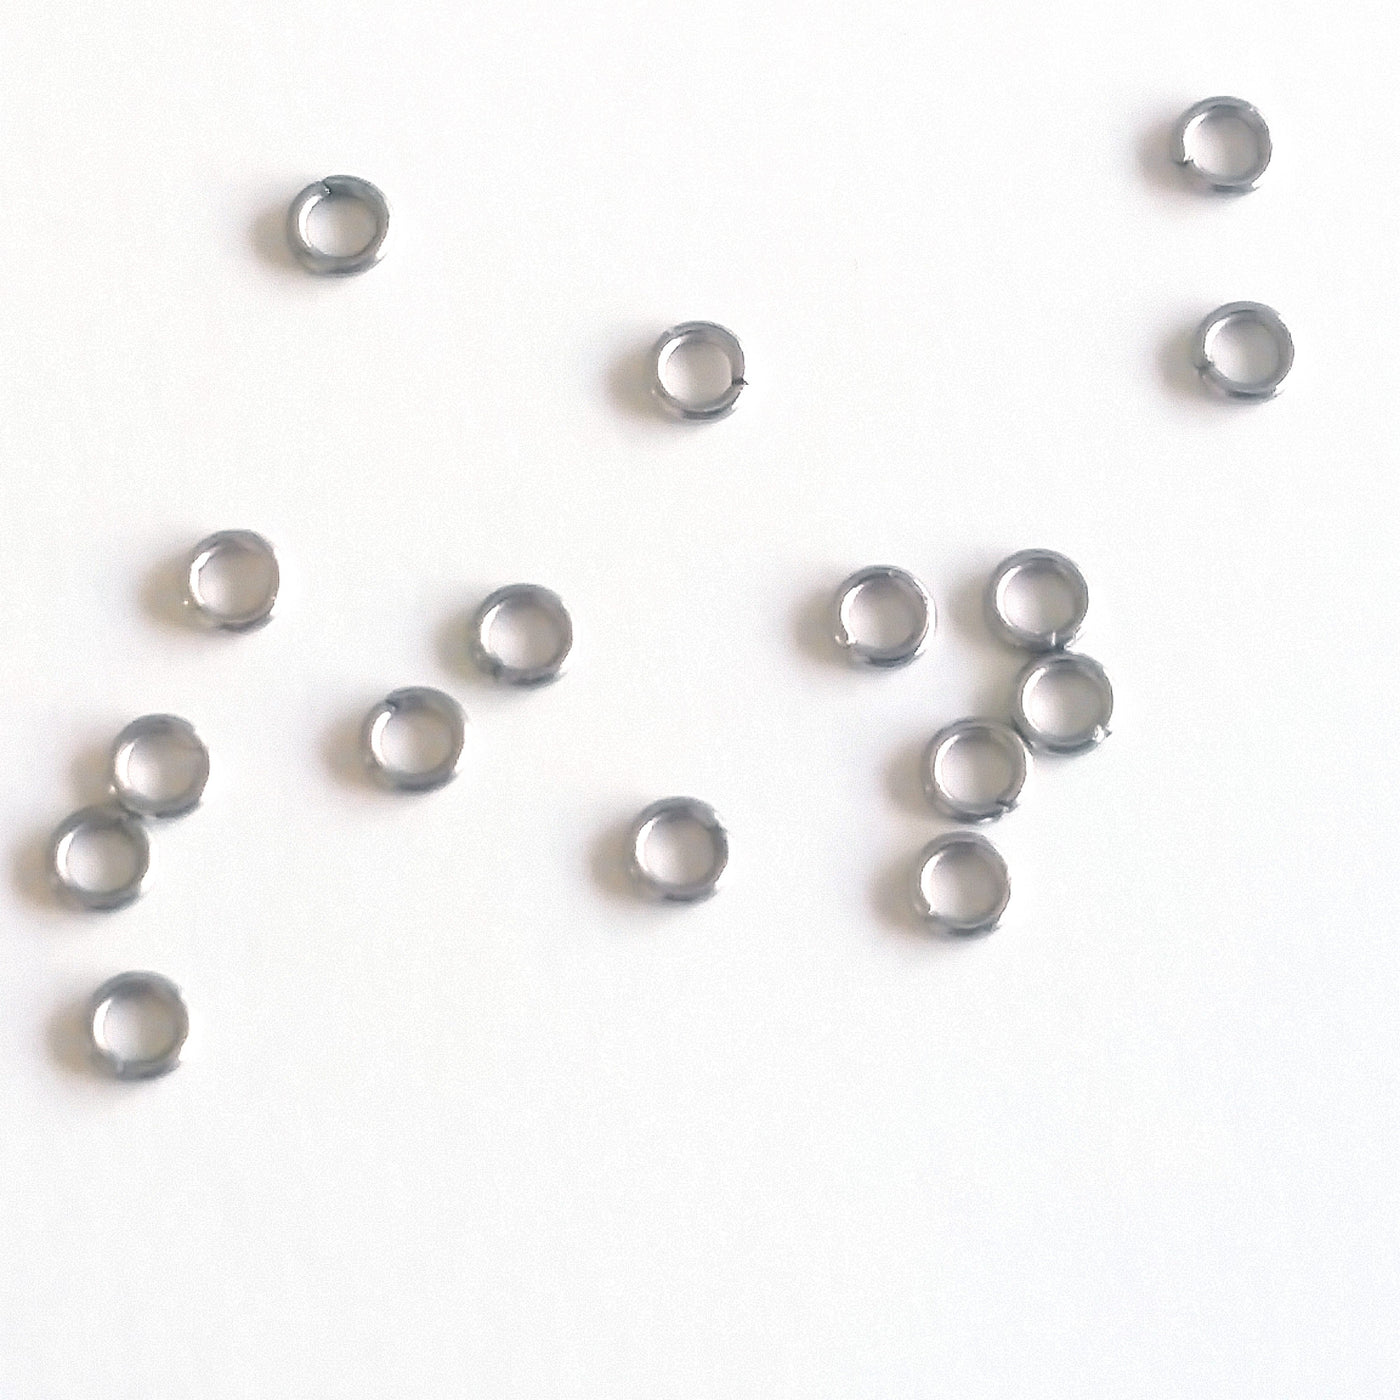 Heavy Jump Rings, 15 mm, 15 gauge, 02823,gunmetal finish, B'sue Boutiques,  Jewelry Supplies, extra large jump rings, thick jump rings, purse hardware